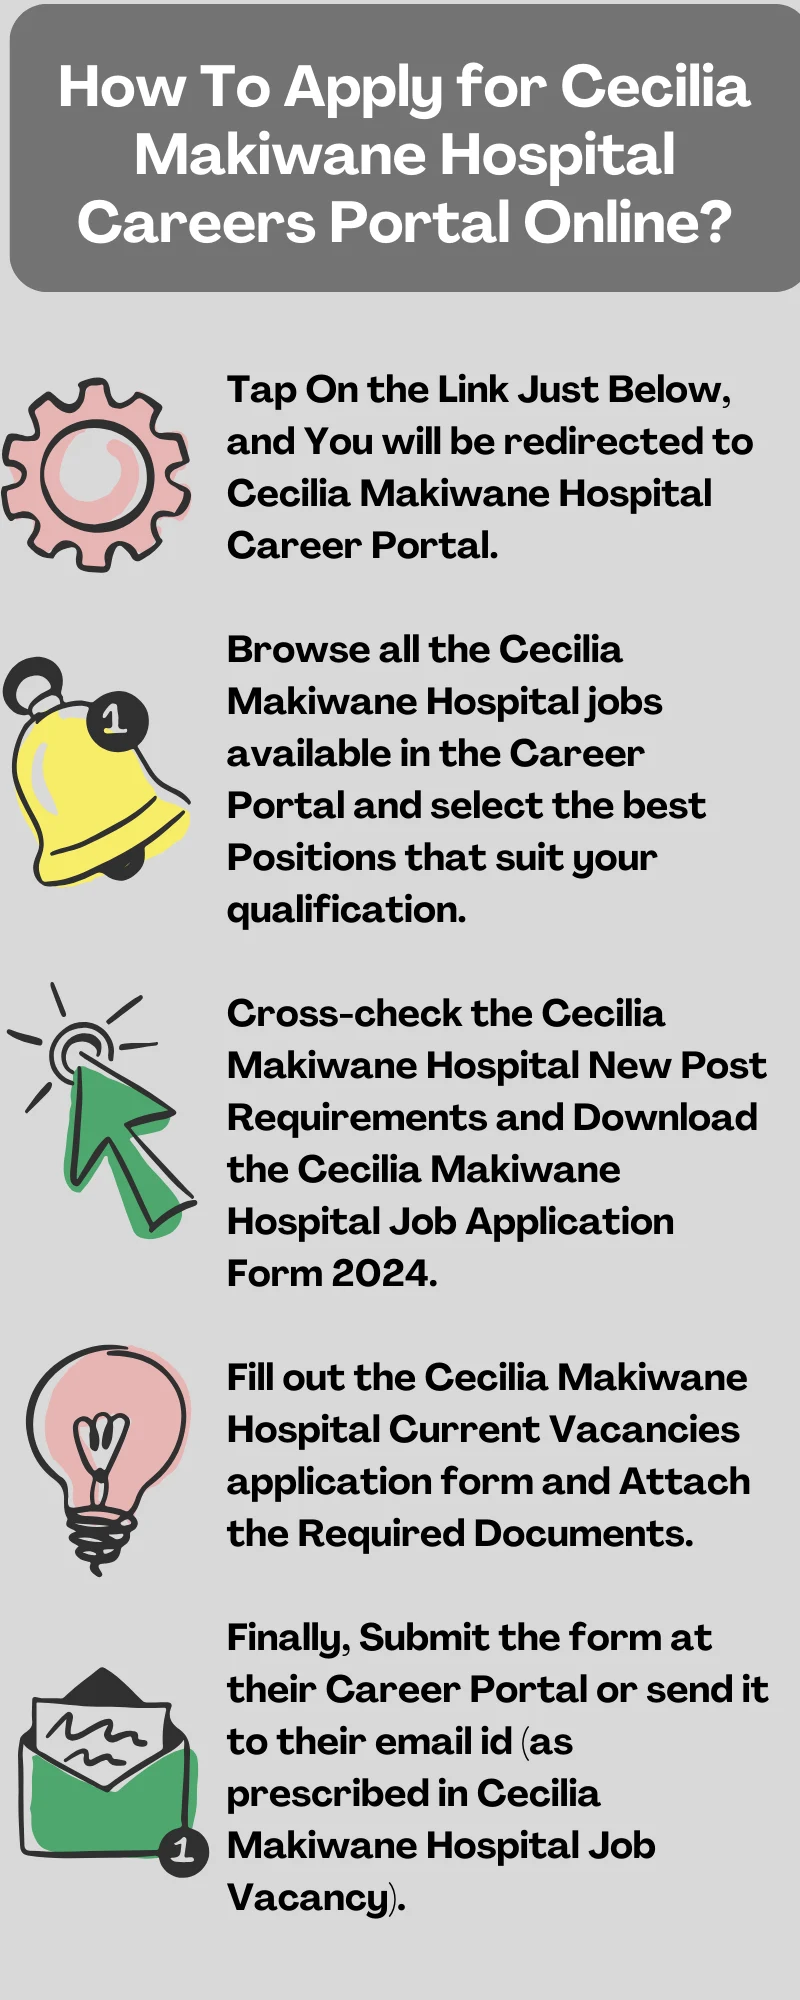 How To Apply for Cecilia Makiwane Hospital Careers Portal Online?